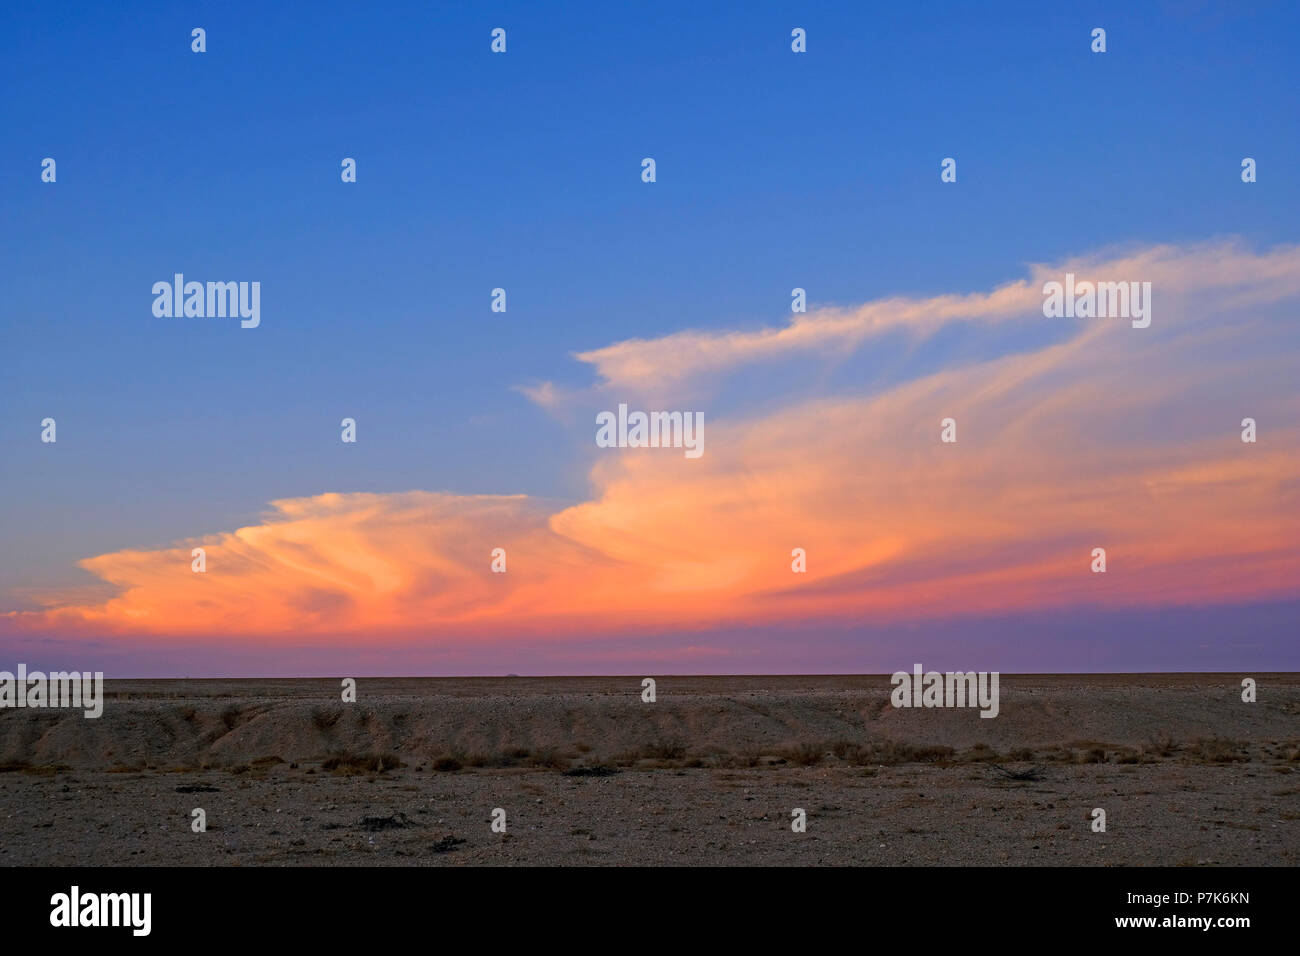 Evening mood after sunset with coloured clouds over a lonely, empty desert landscape in Namibia, Dorob National Park Stock Photo